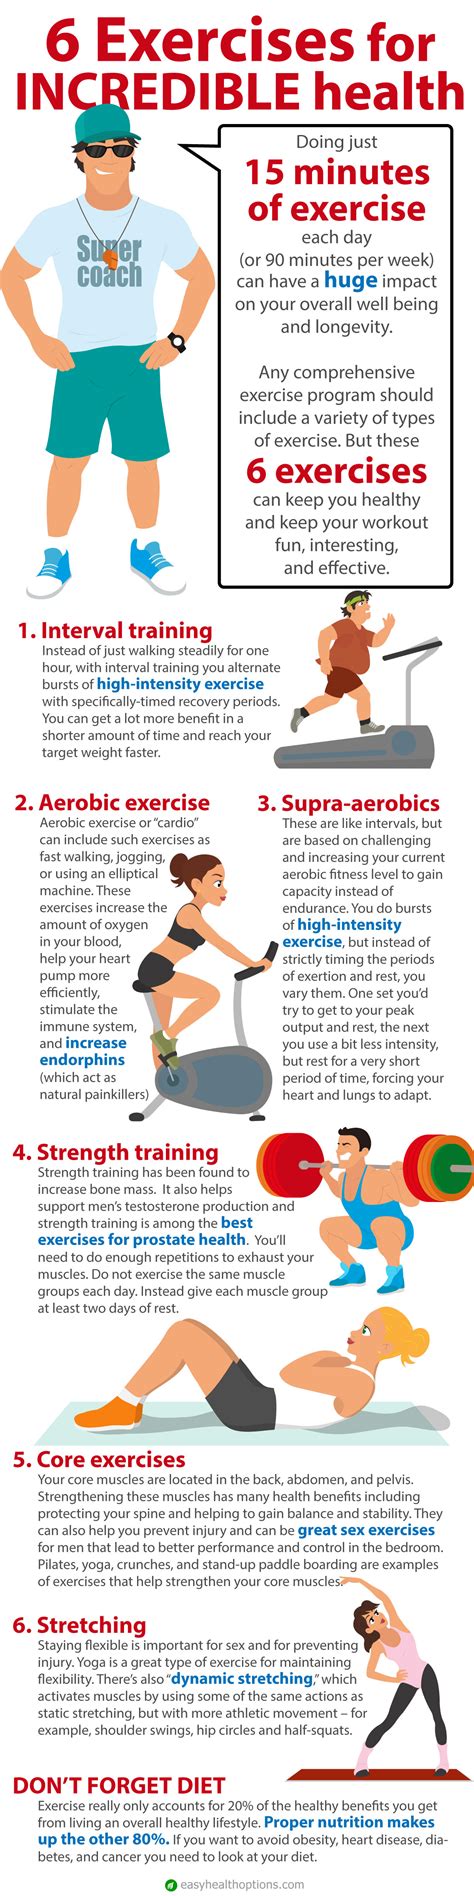 6 Exercises For Incredible Health Infographic Easy Health Options